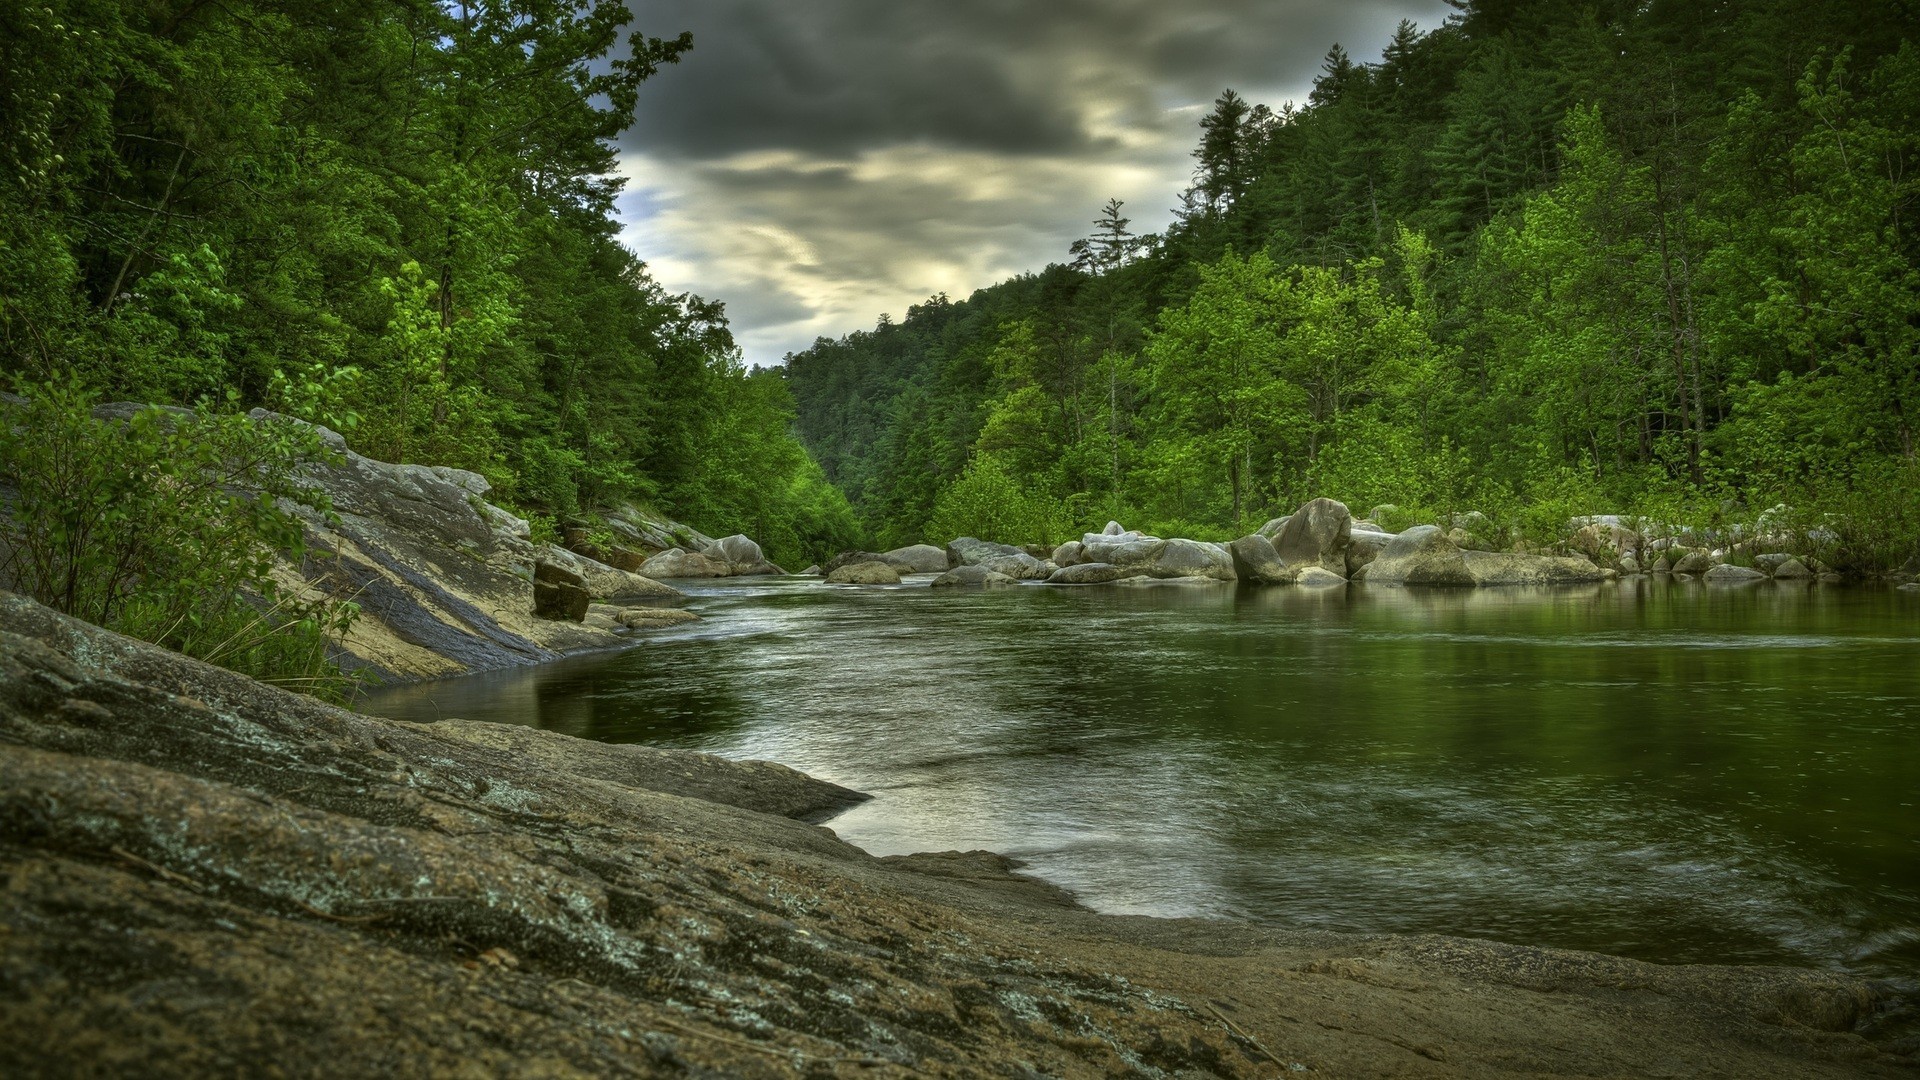 General 1920x1080 nature HDR landscape river trees water outdoors